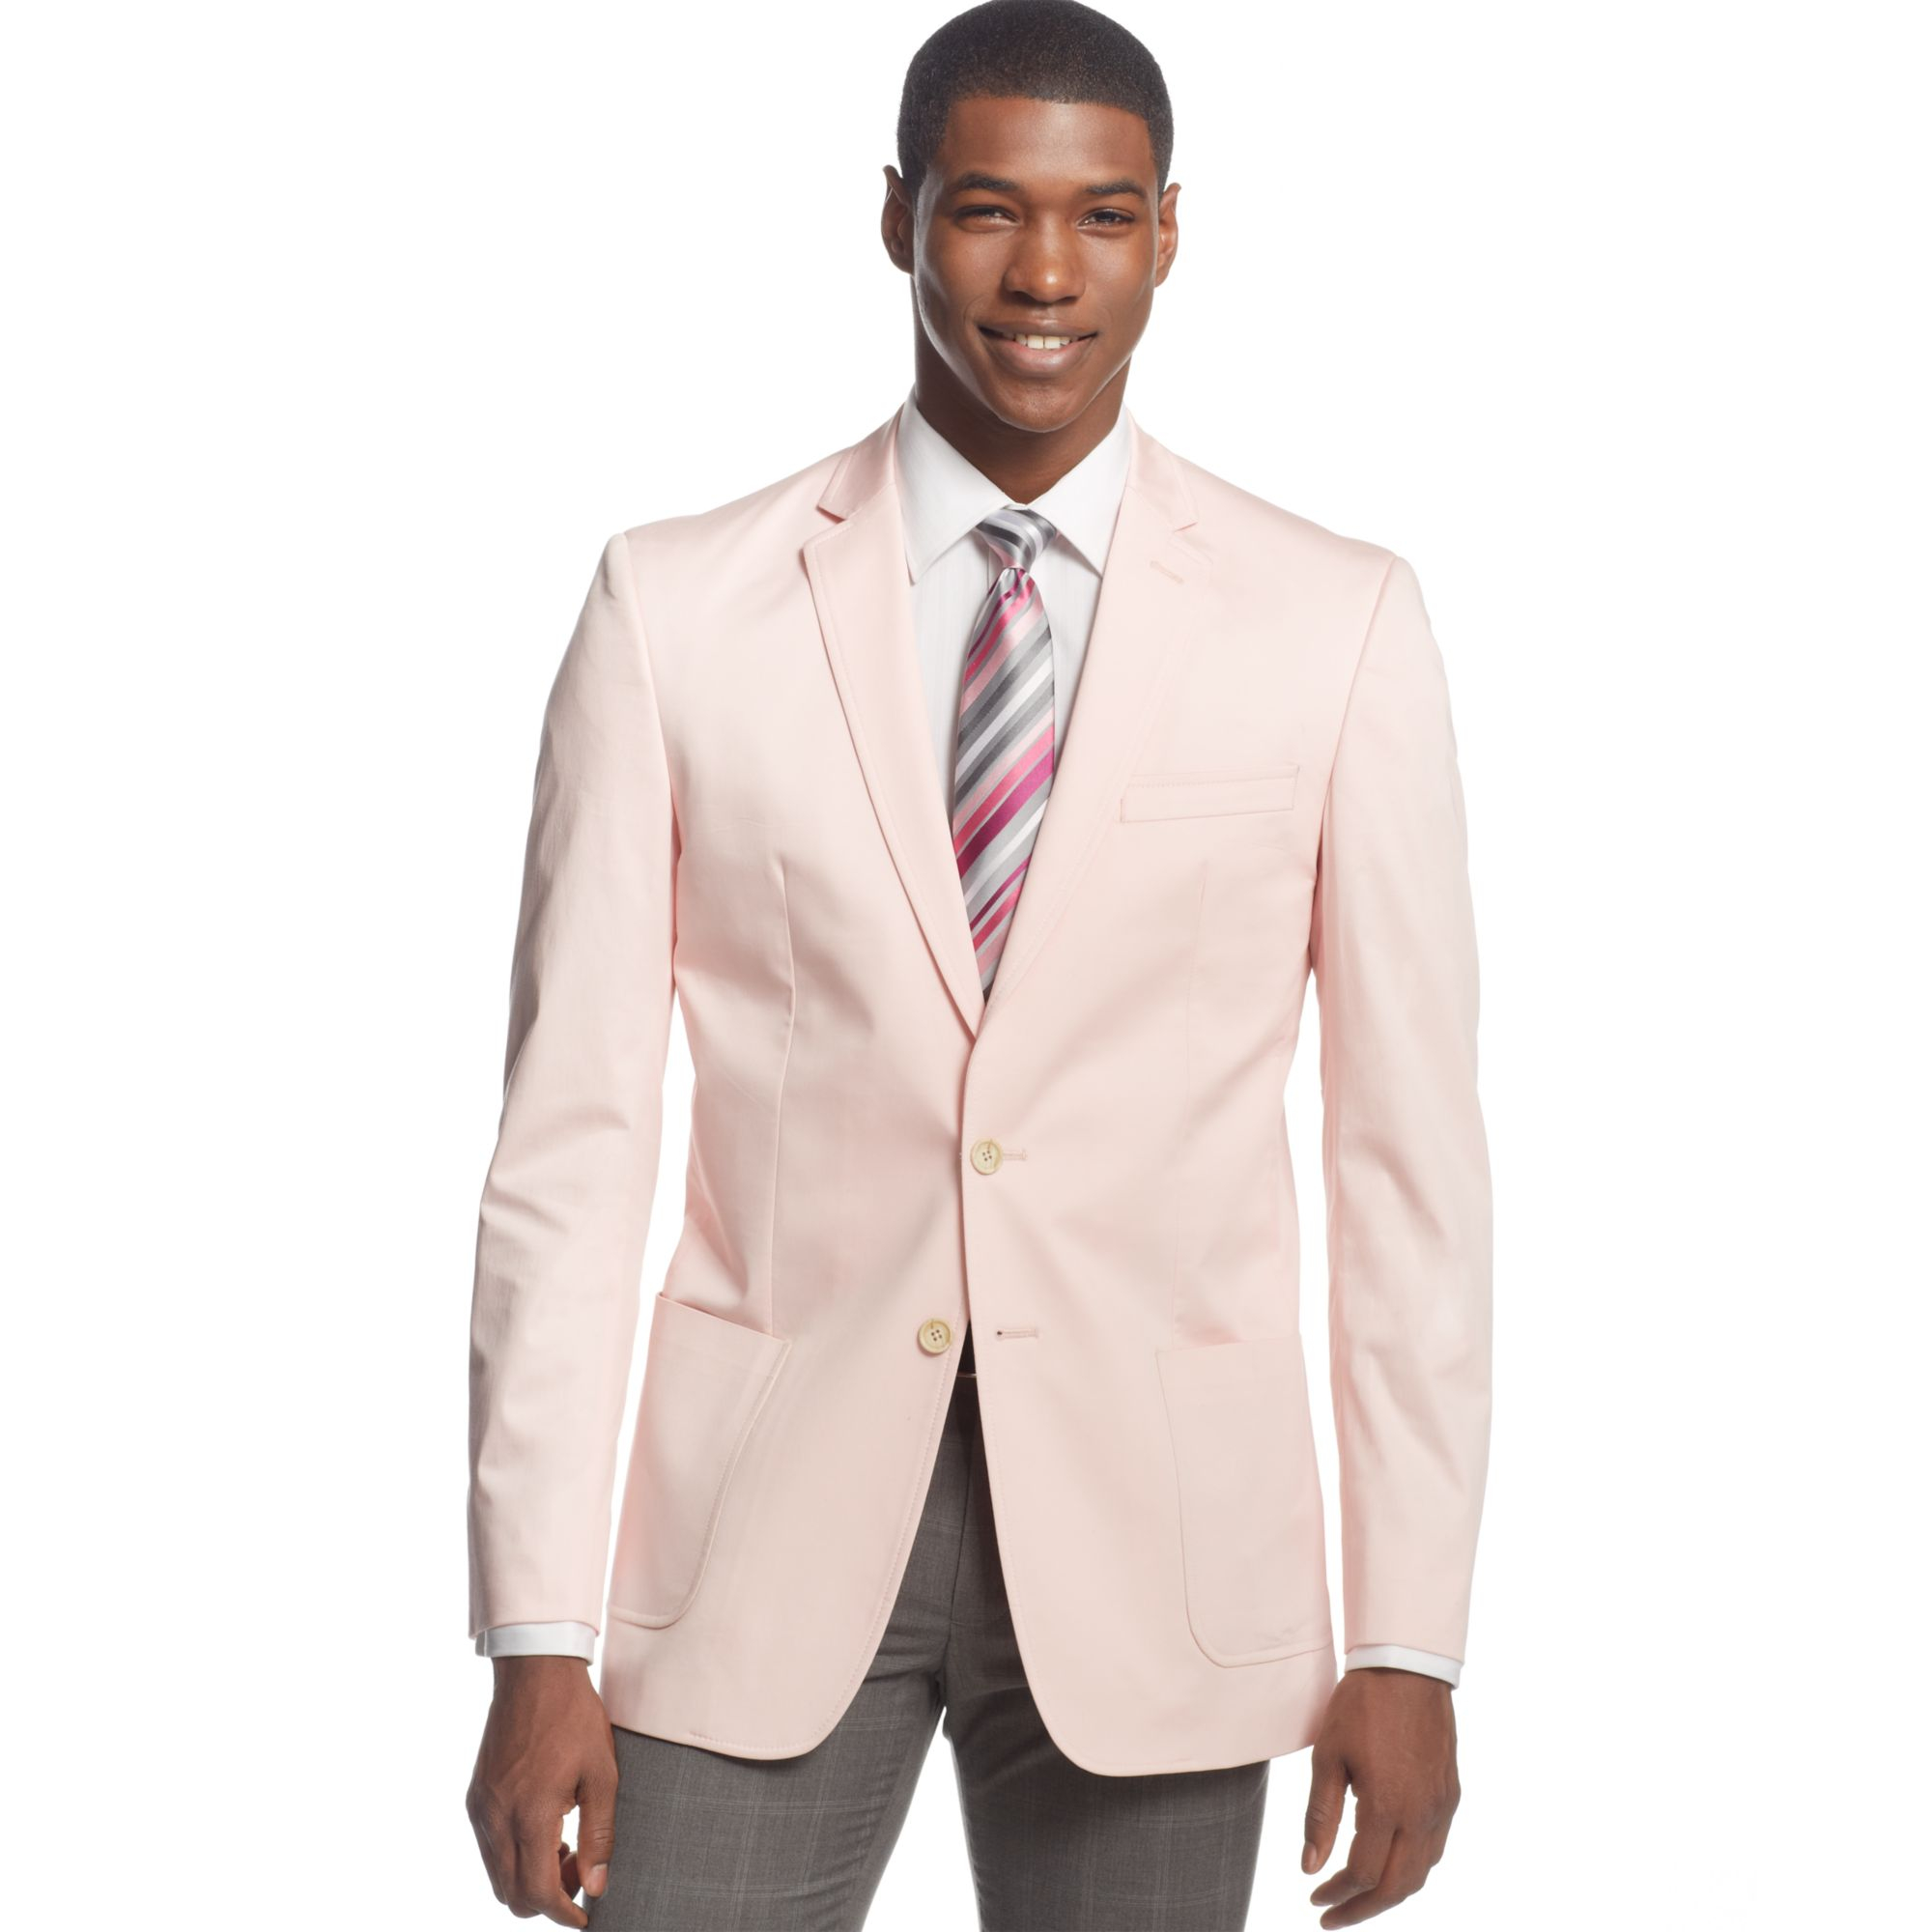 Lyst - Sean John Cotton Blazer Big and Tall in Pink for Men